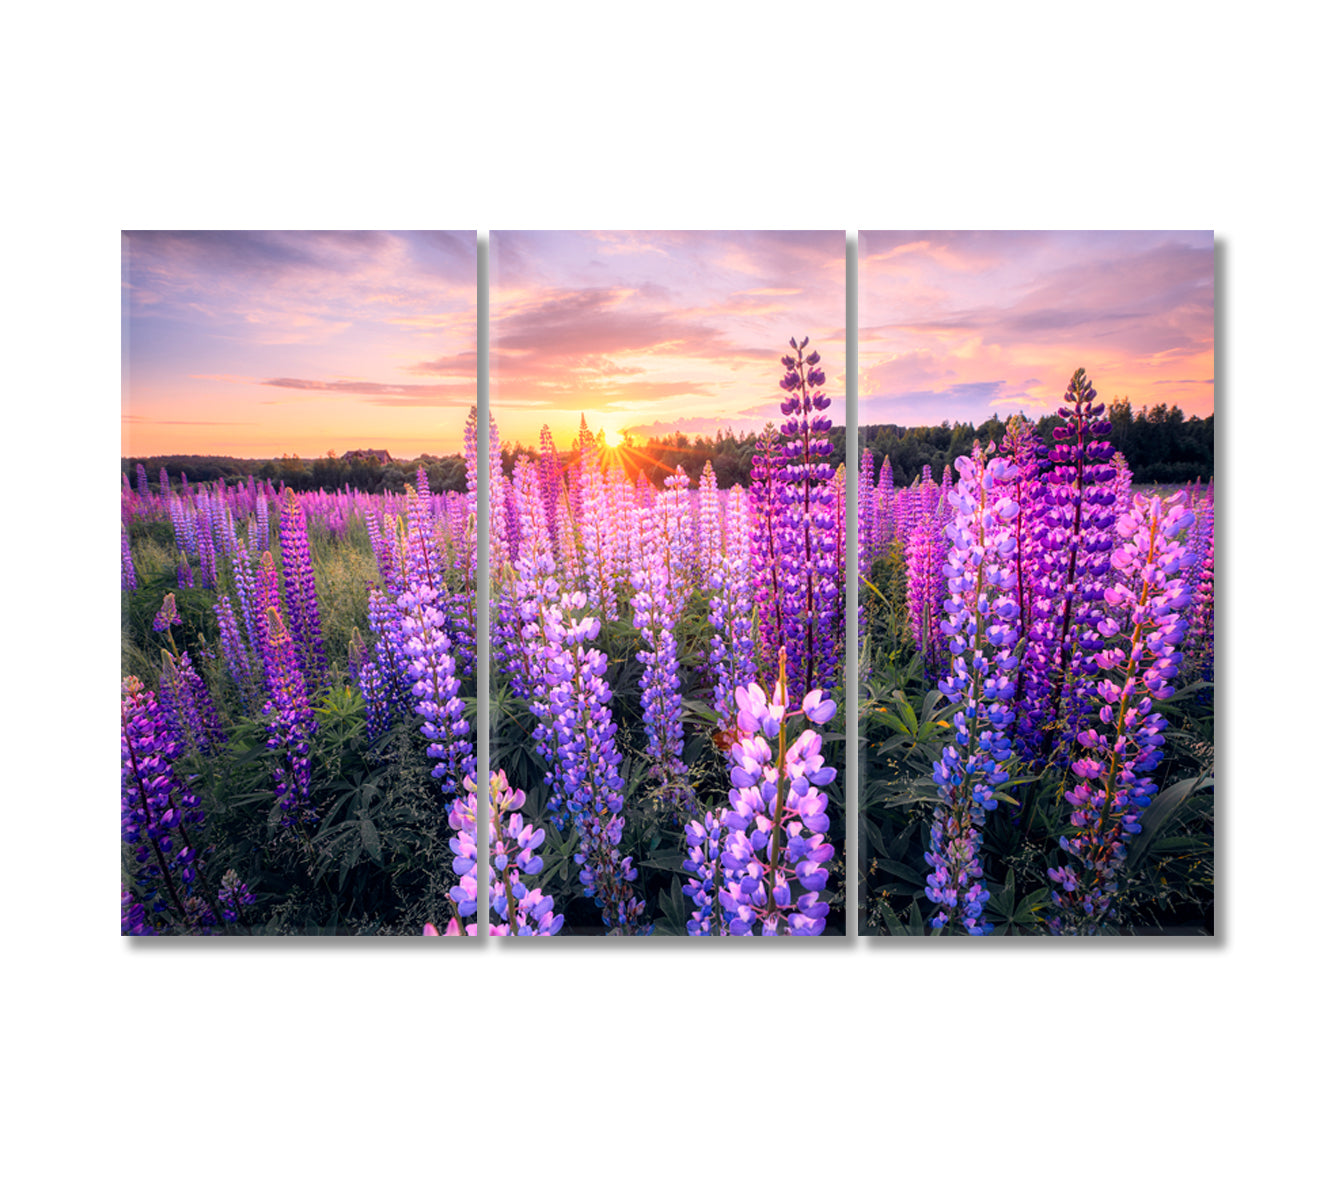 Summer Sunset over Field with Blooming Lupins Canvas Print-Canvas Print-CetArt-3 Panels-36x24 inches-CetArt